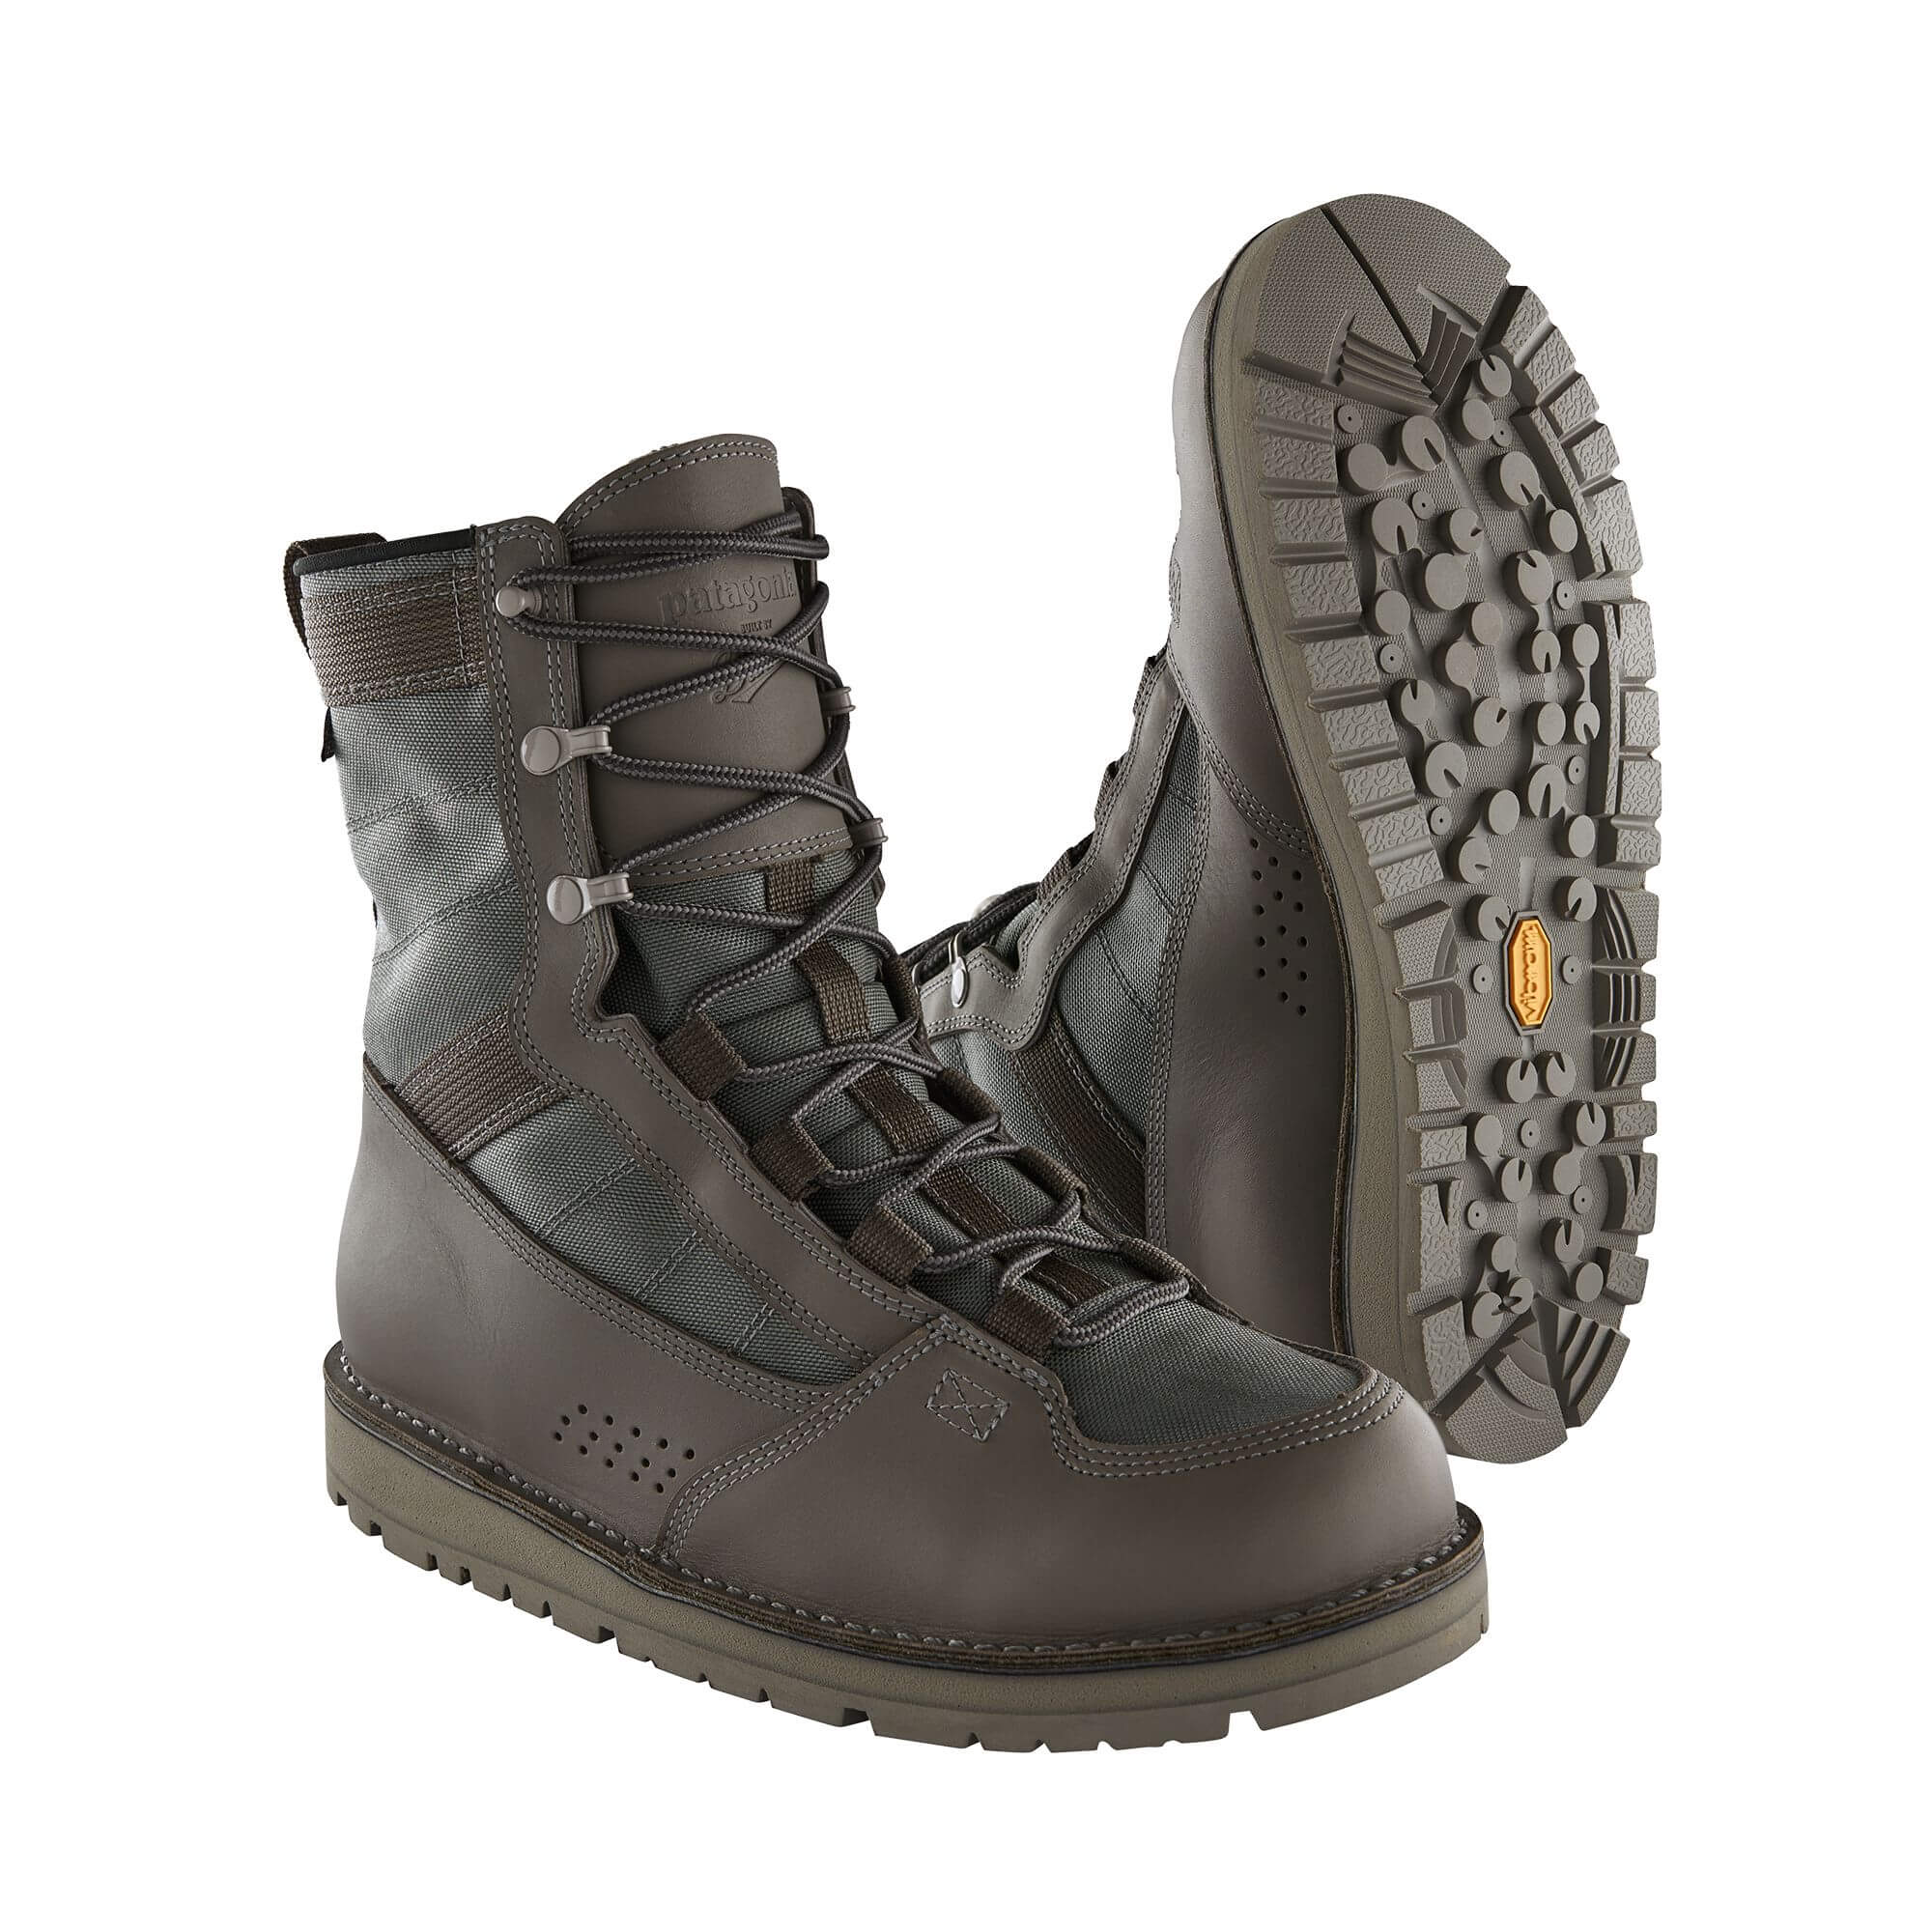 Patagonia River Salt Wading Boot (by Danner) - 5